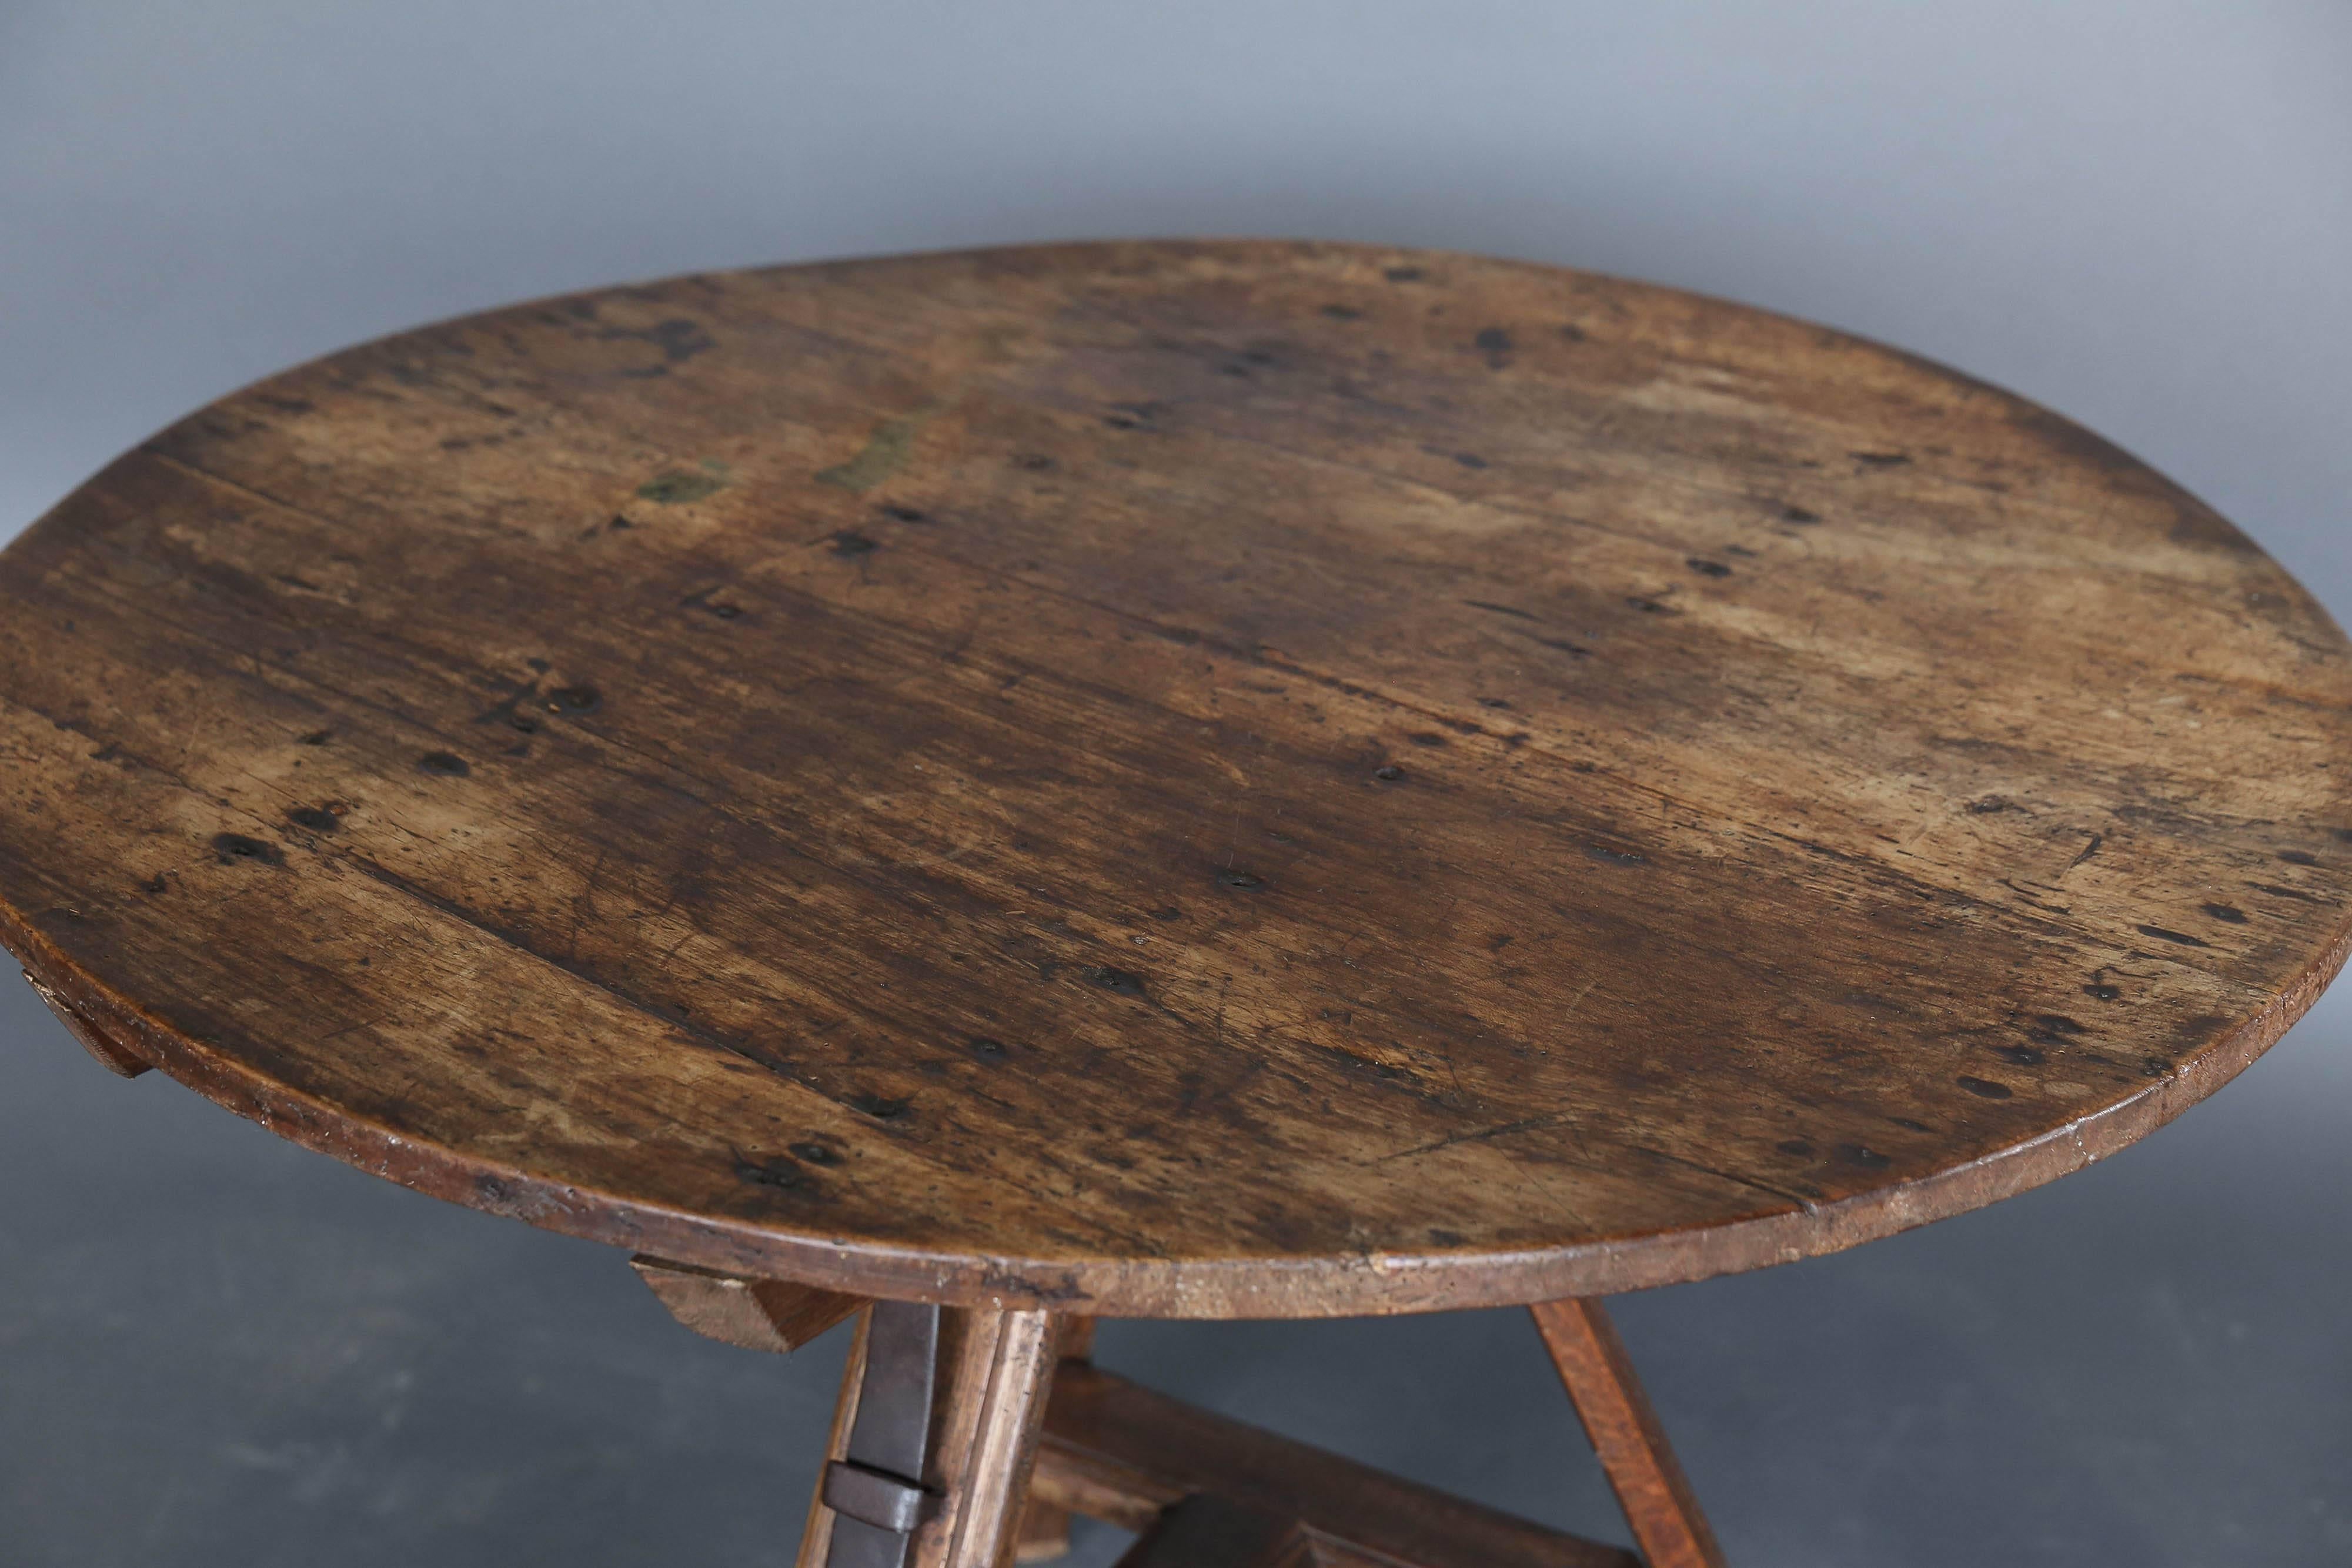 19th century round Dutch tripod table with hand-wrought original iron.